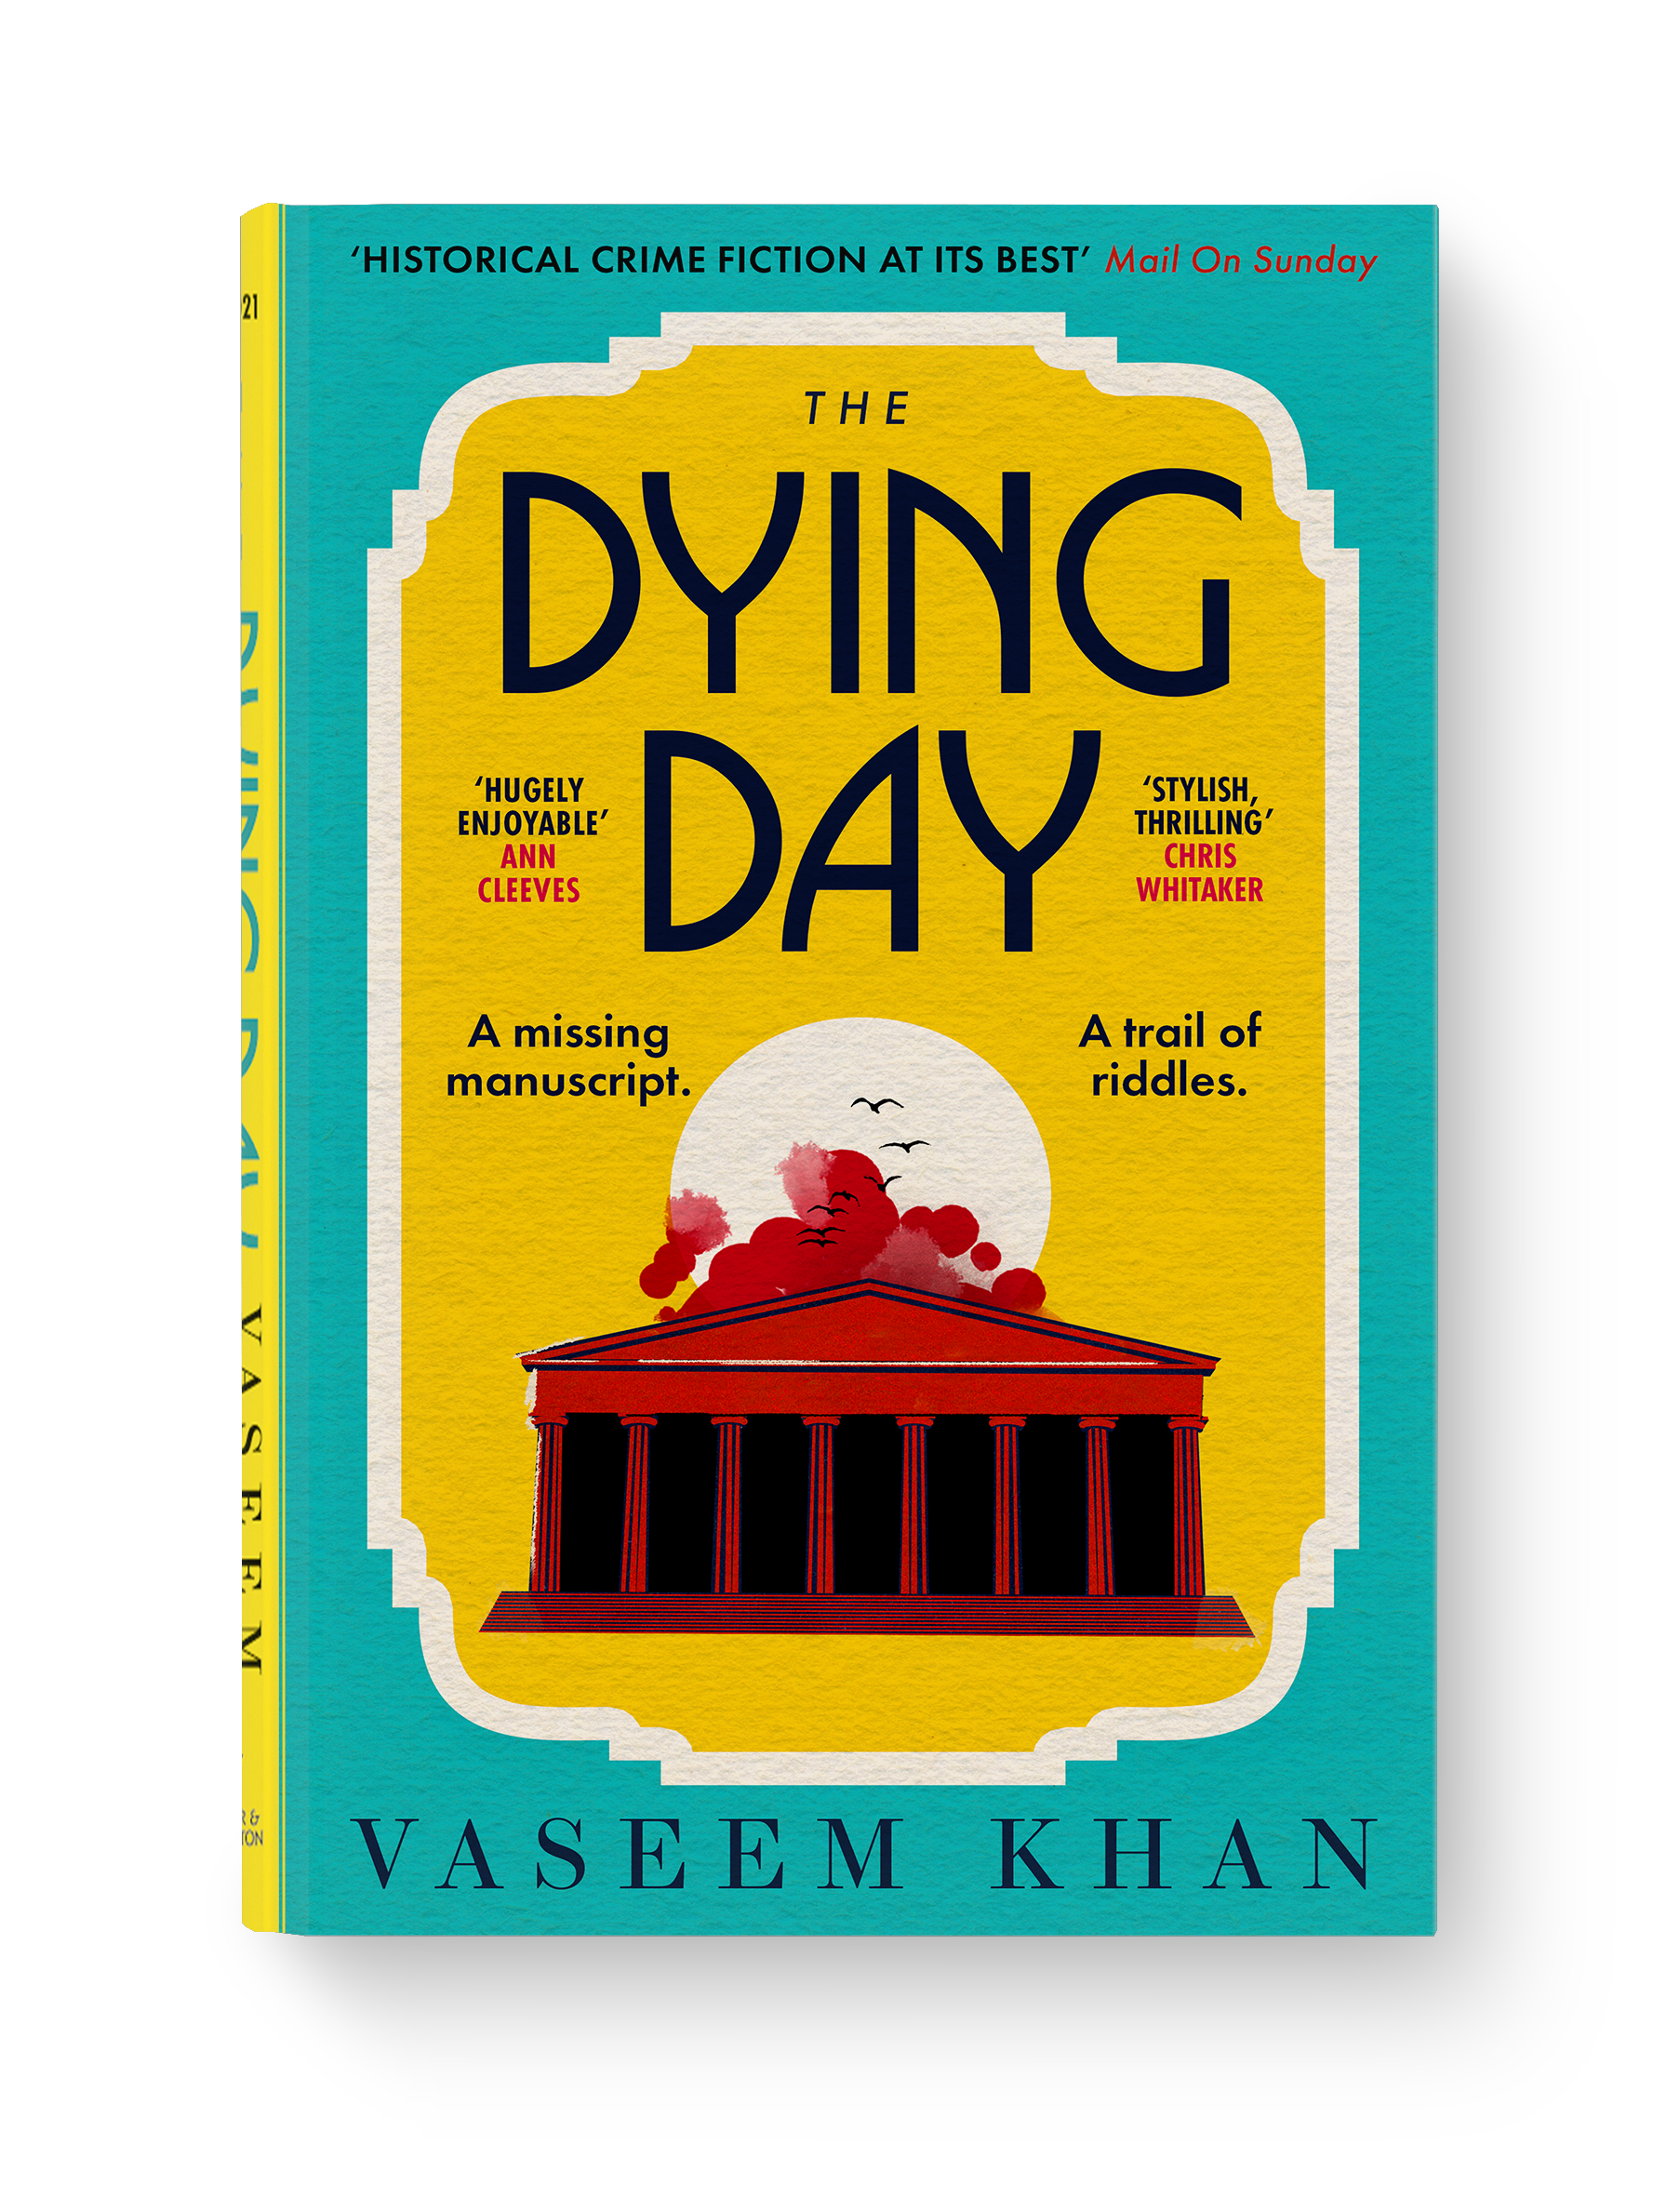 The Dying Day book cover image